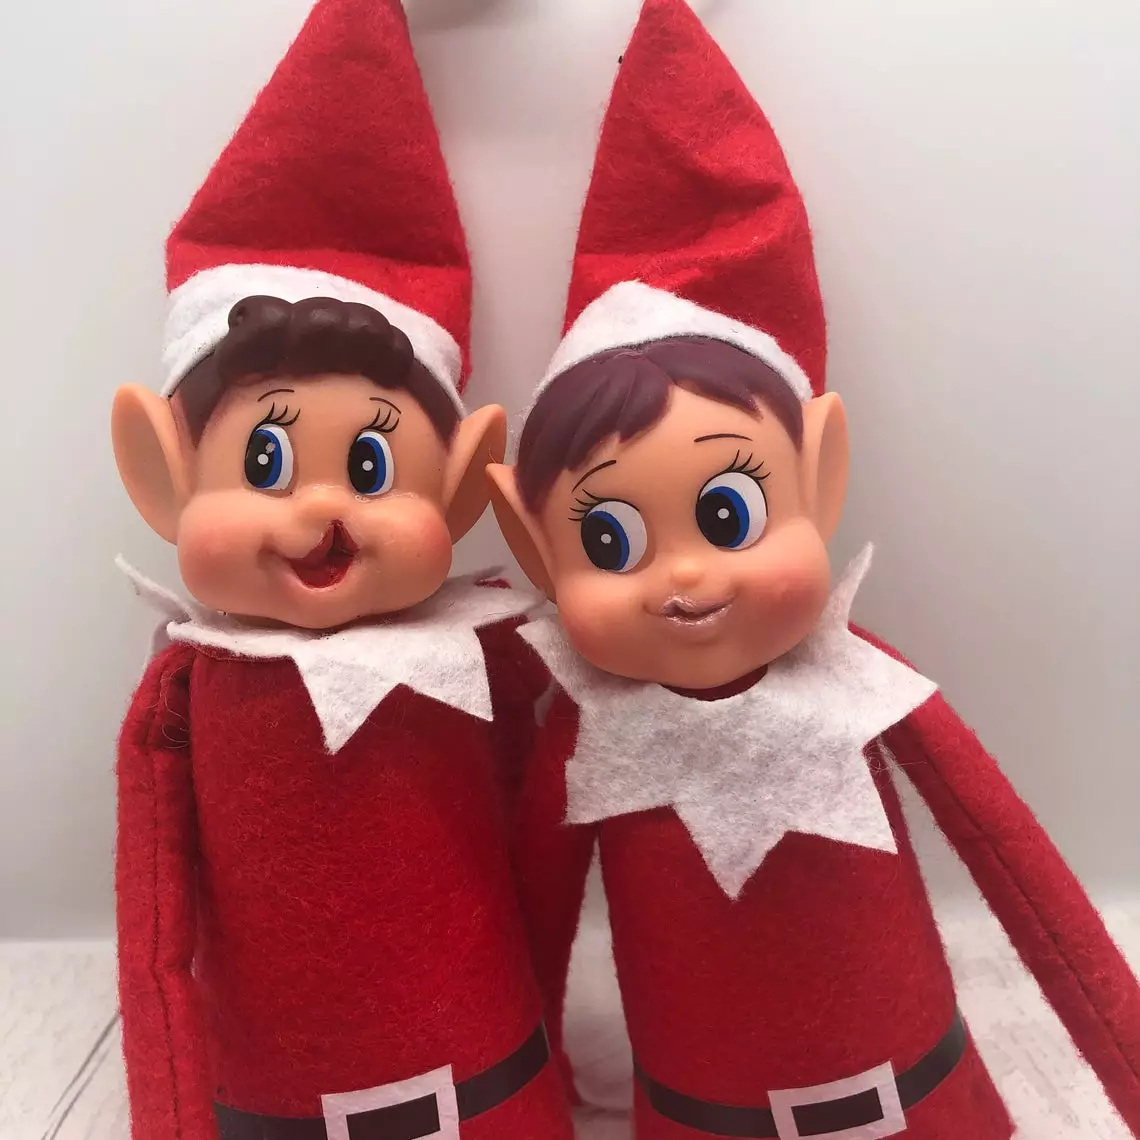 The Elf dolls mean that children with specific medical needs feel represented (